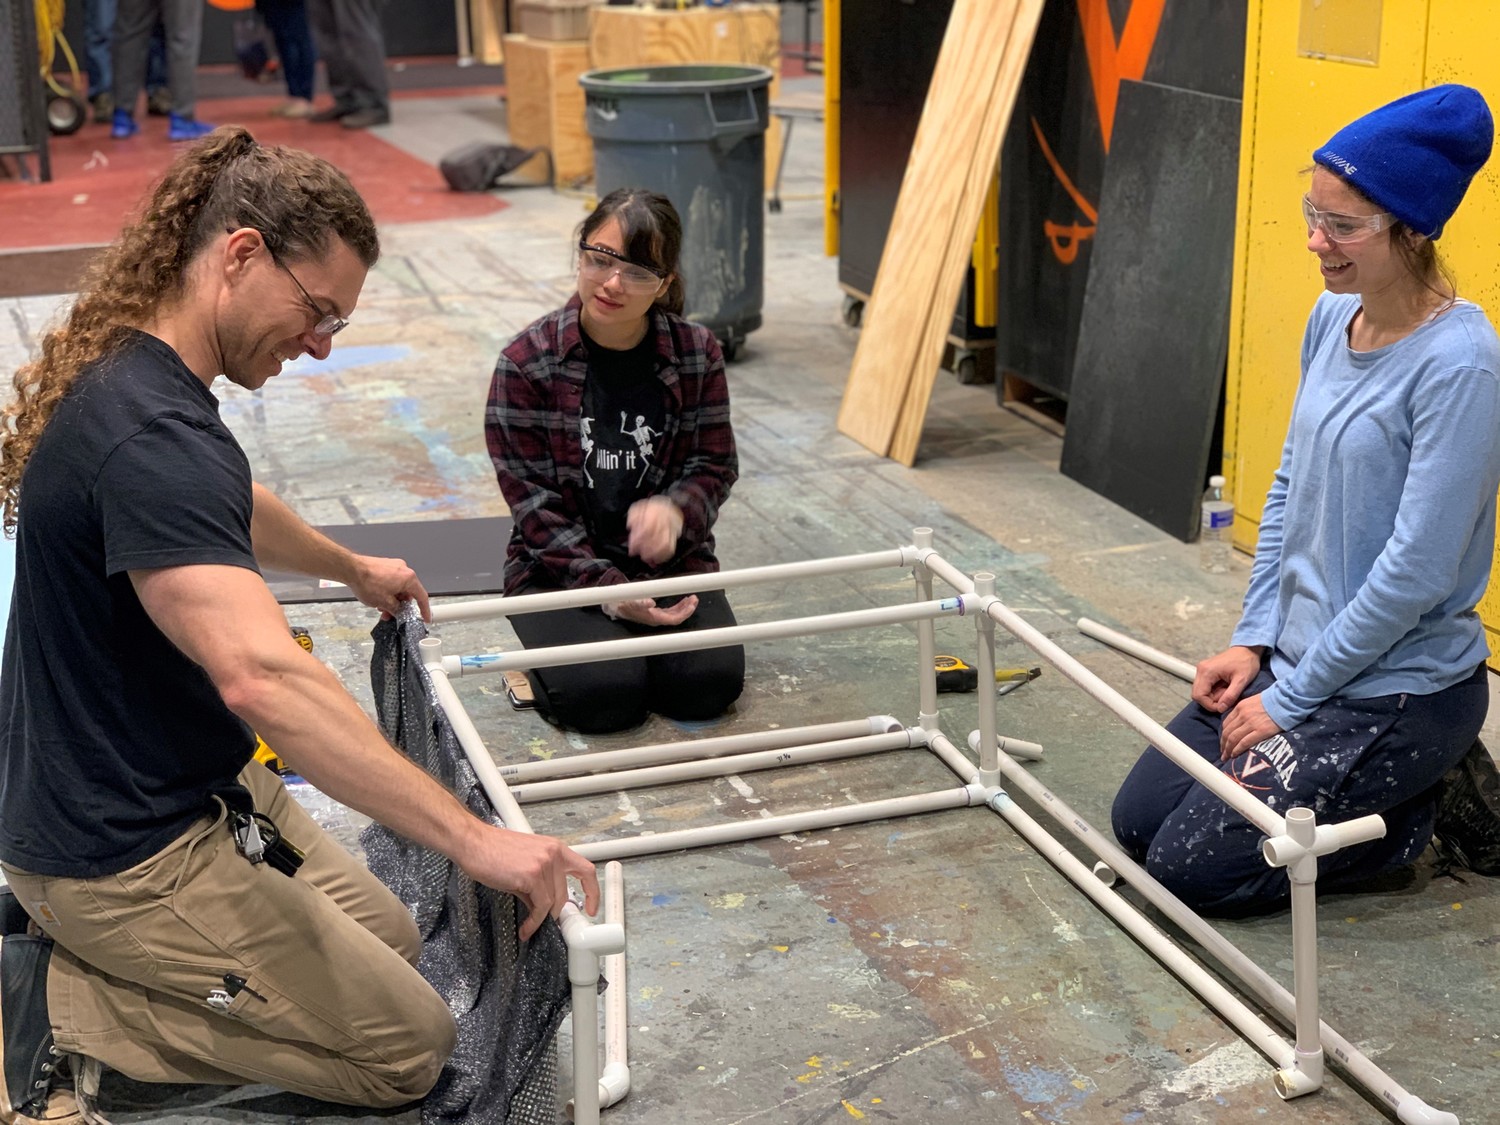 (L to R) Brian Gibney (Bennett’s Village) and undergraduate student Megumi (Meg) Ritchie helping Jessica Burnam with frame work for Rock Star Princess.